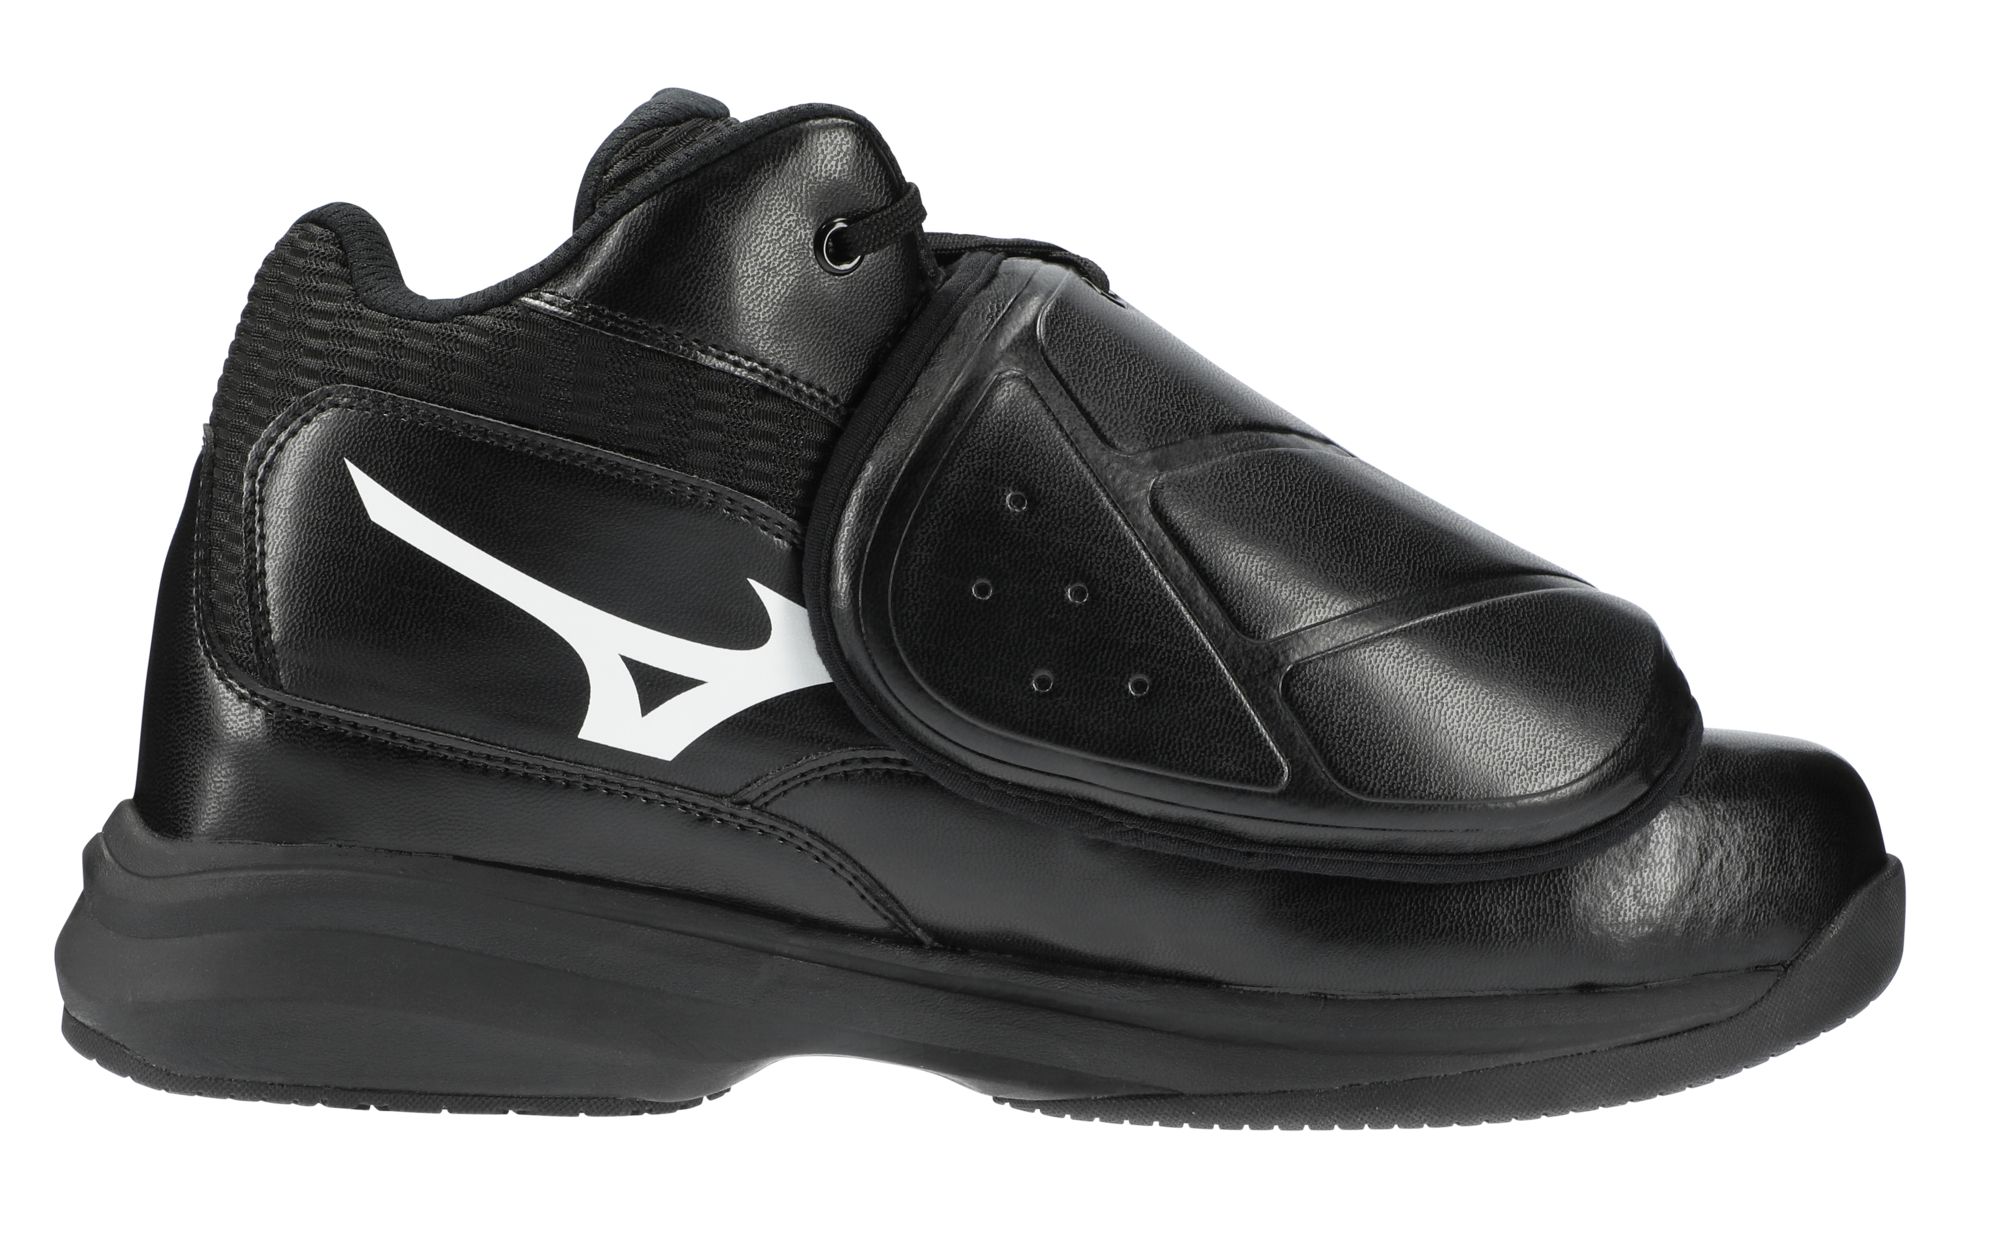 Image of Mizuno Men's Pro Wave Umpire Plate Shoes Cleats